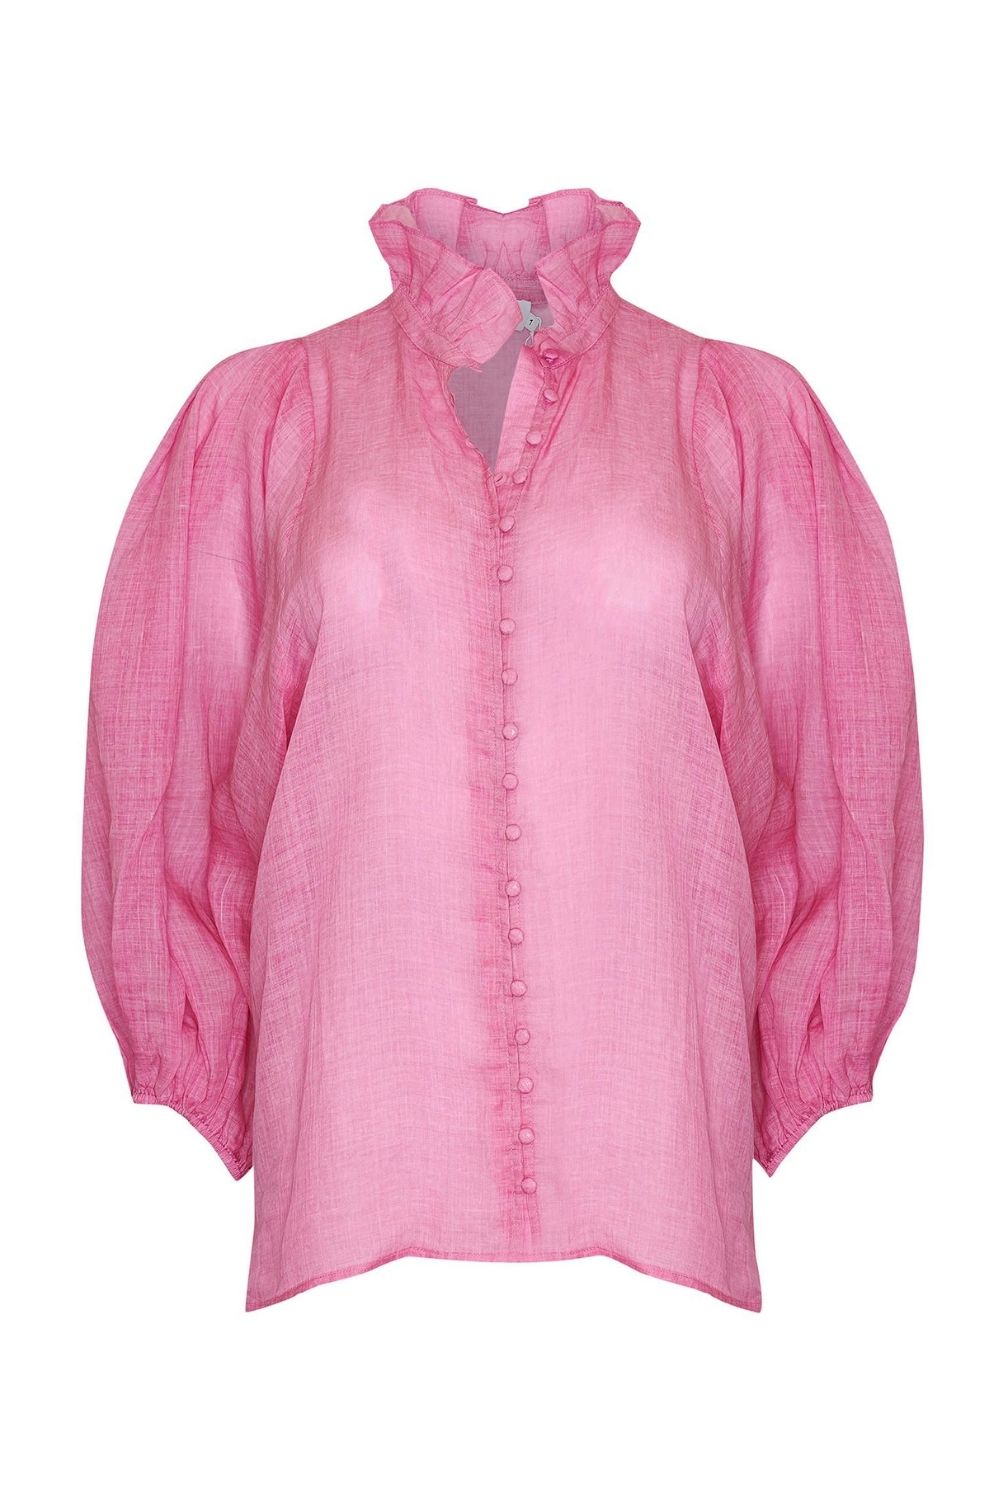 pink, covered buttons, voluminous sleeve, high neck, ruffle collar, mid length sleeve, elasticated cuff, top, product image